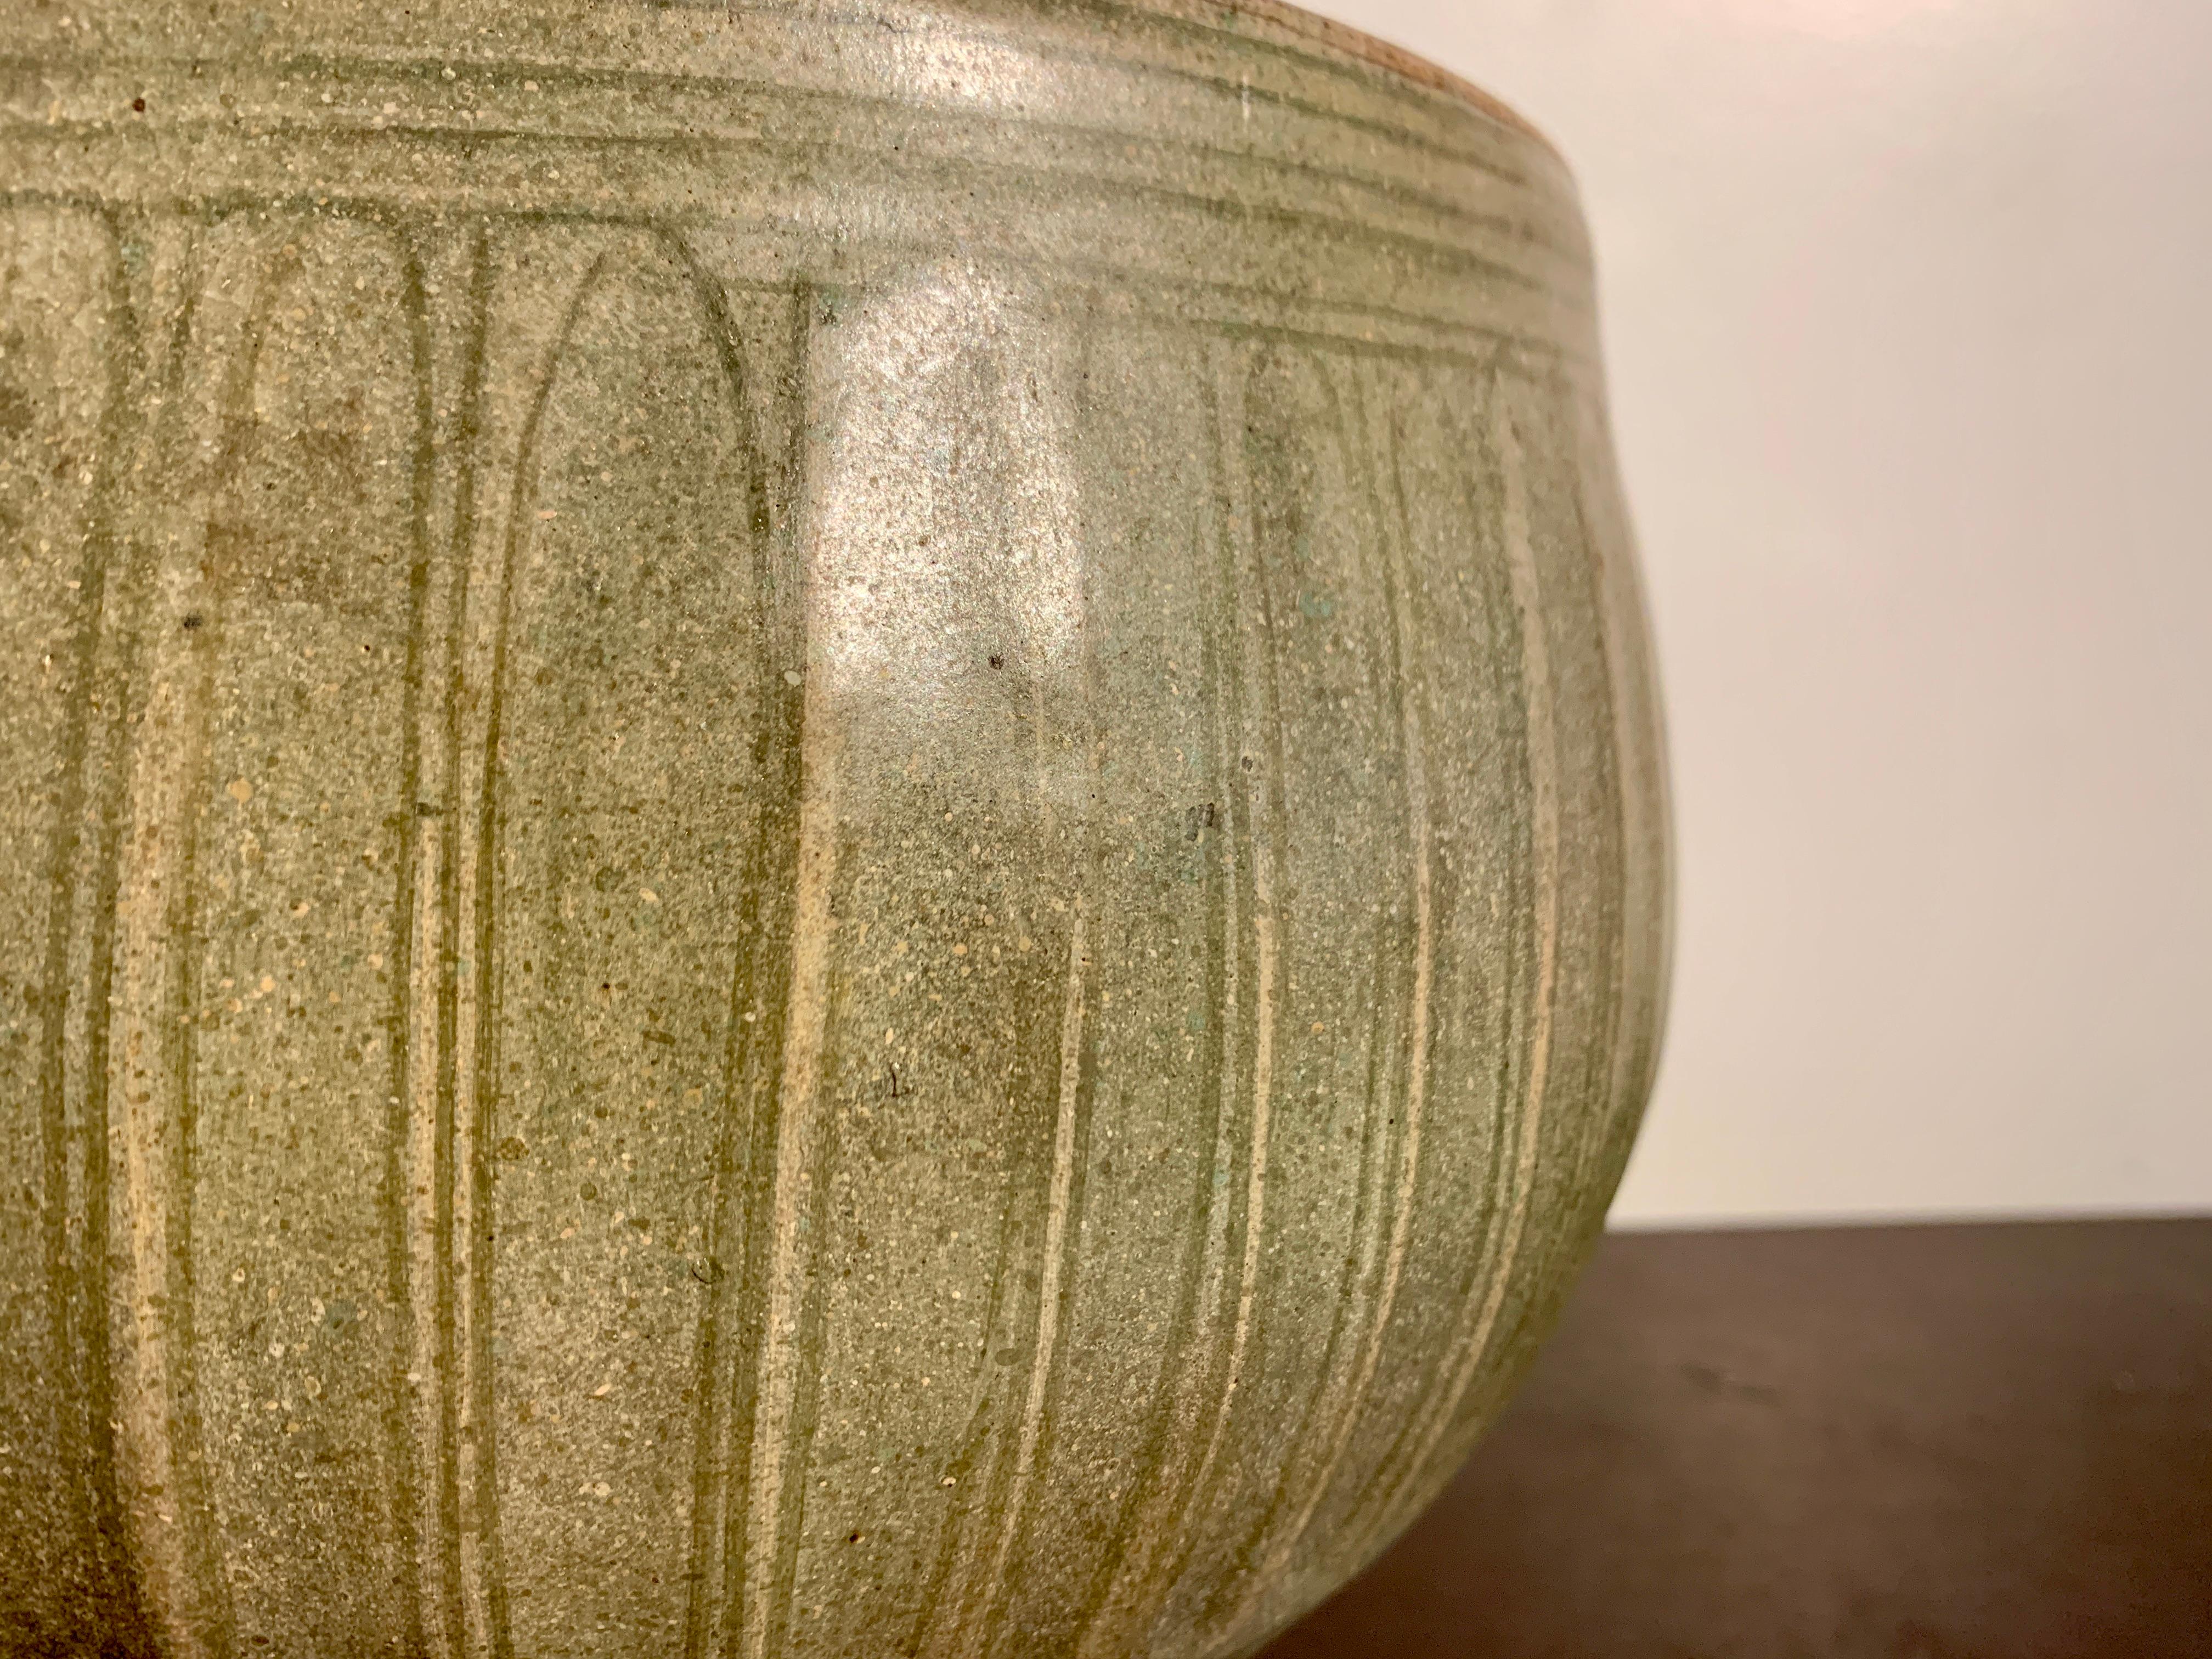 Vietnamese Celadon Lotus Vessel, Ly or Tran Dynasty, 13th/14th Century, Vietnam In Good Condition For Sale In Austin, TX